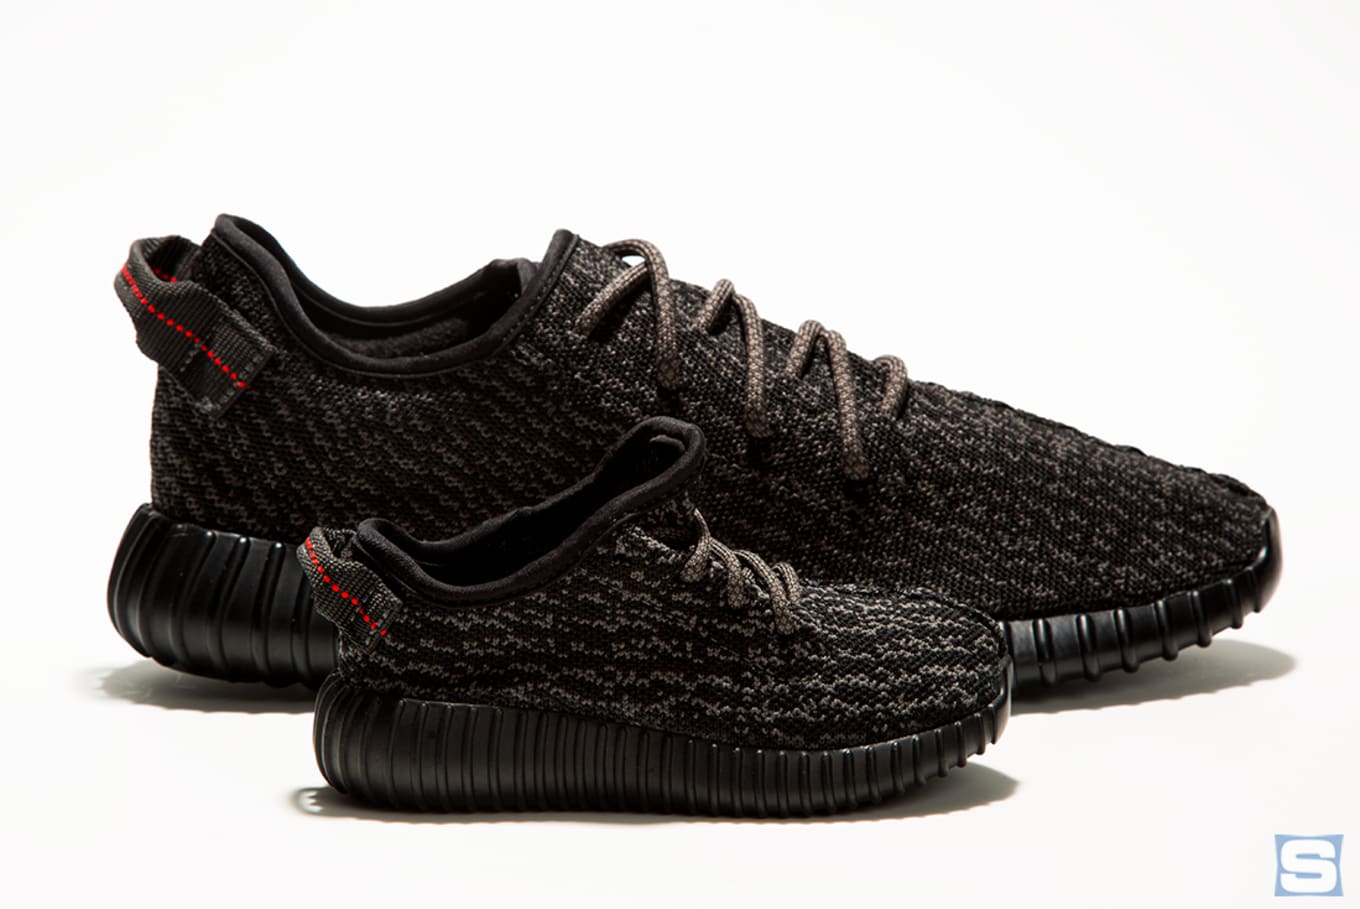 Baby Adidas Yeezy Boost Price | Sole 